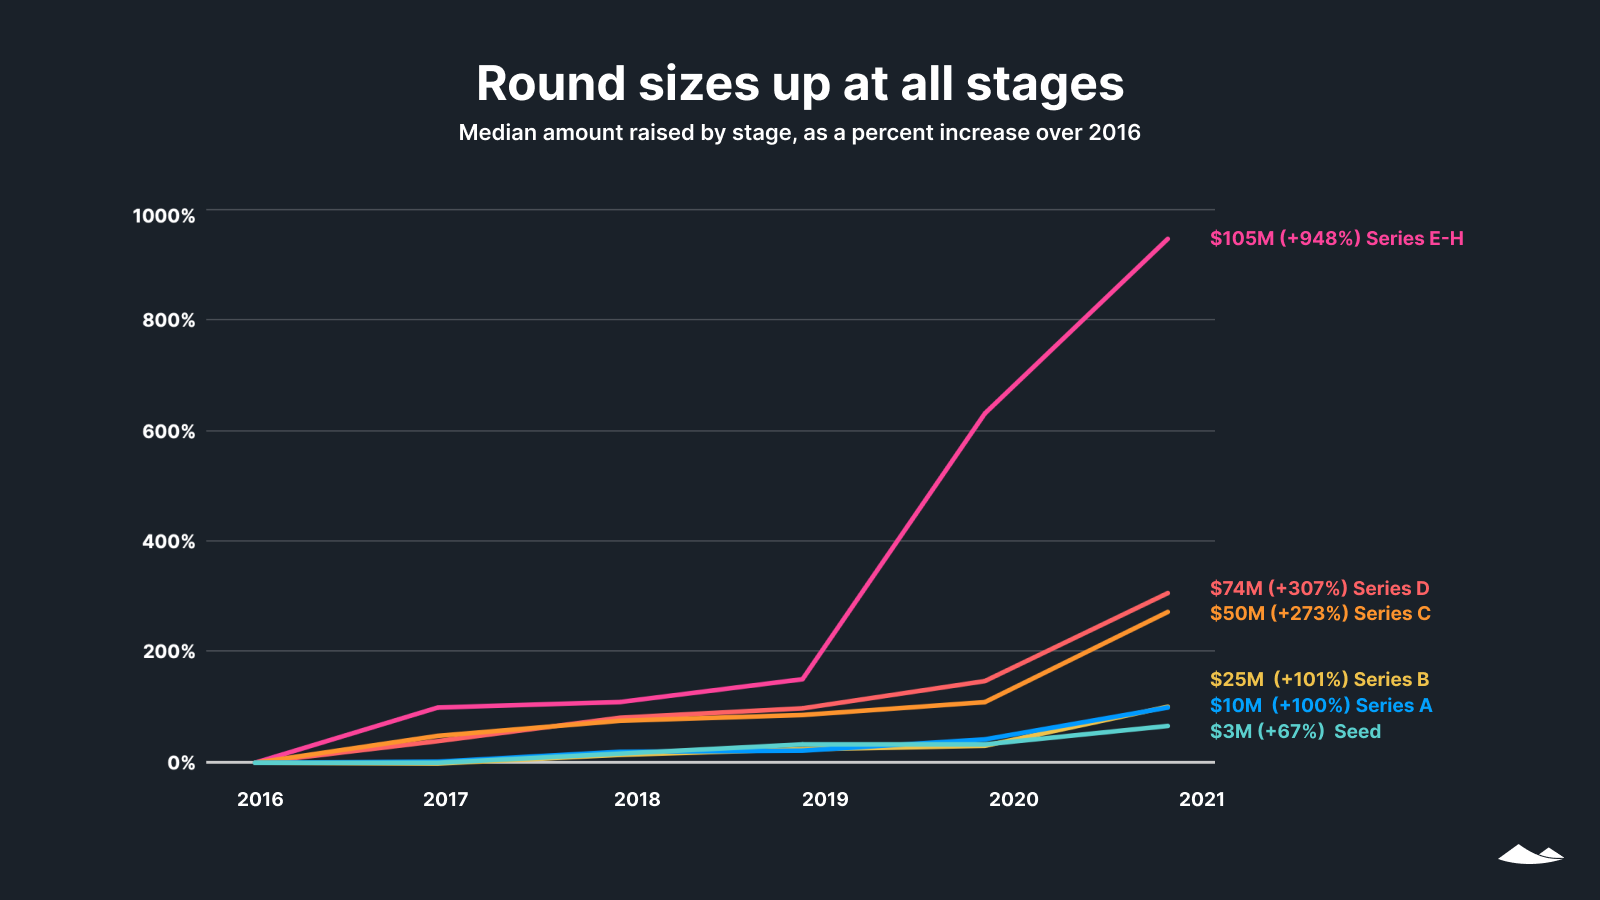 Round sizes up at all stages: Median amount raised by stage, 2016-21, as a percent increase over 2016